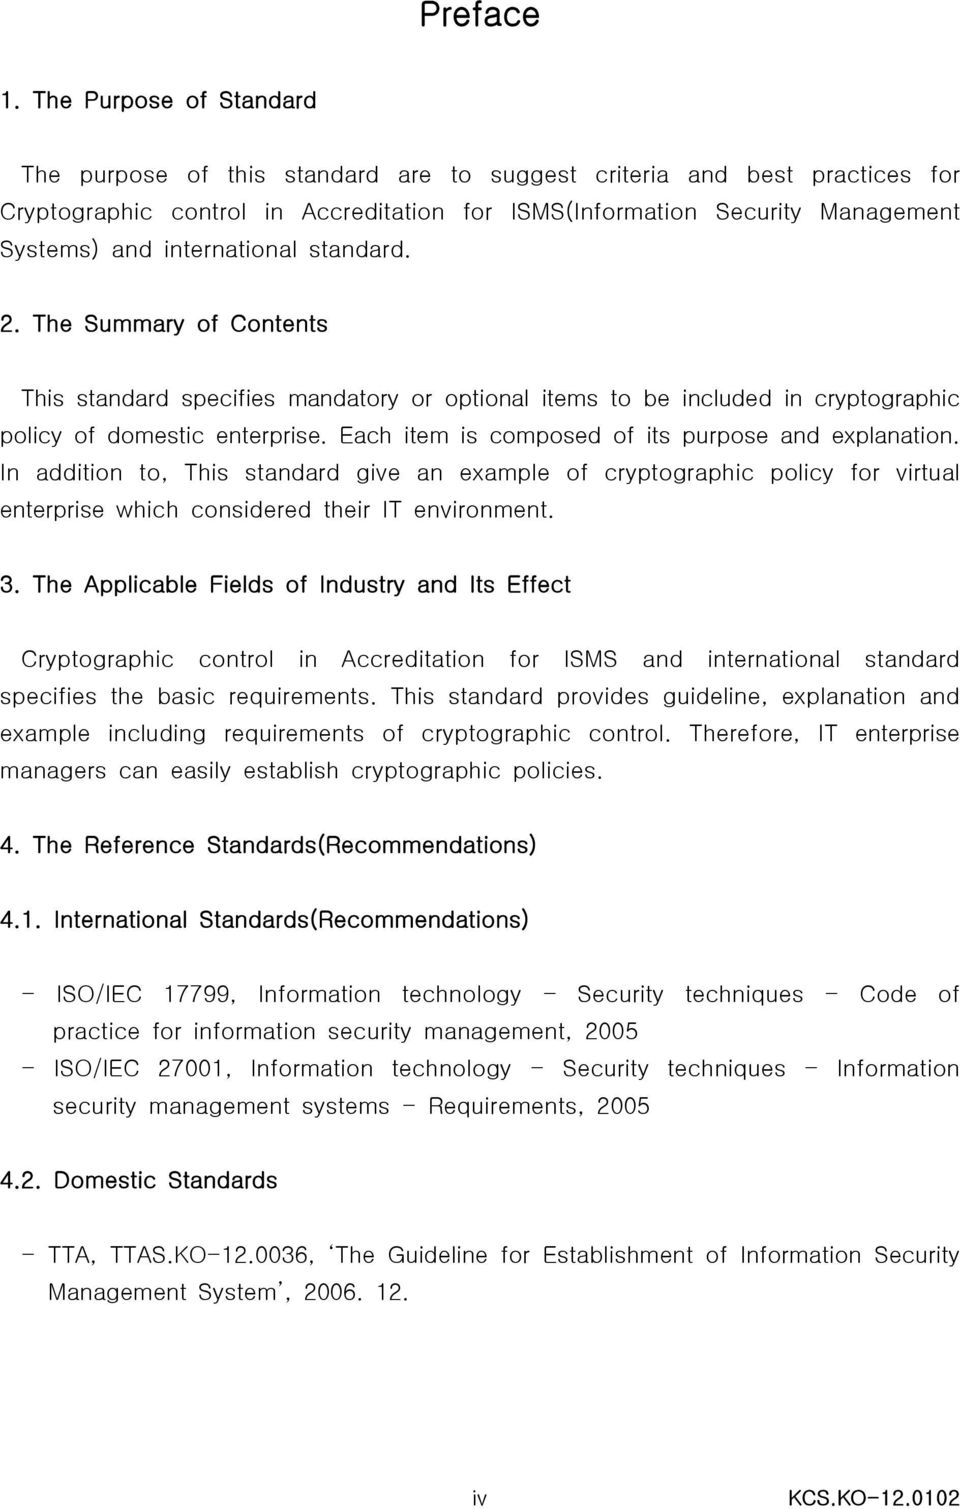 international standard. 2. The Summary of Contents This standard specifies mandatory or optional items to be included in cryptographic policy of domestic enterprise.